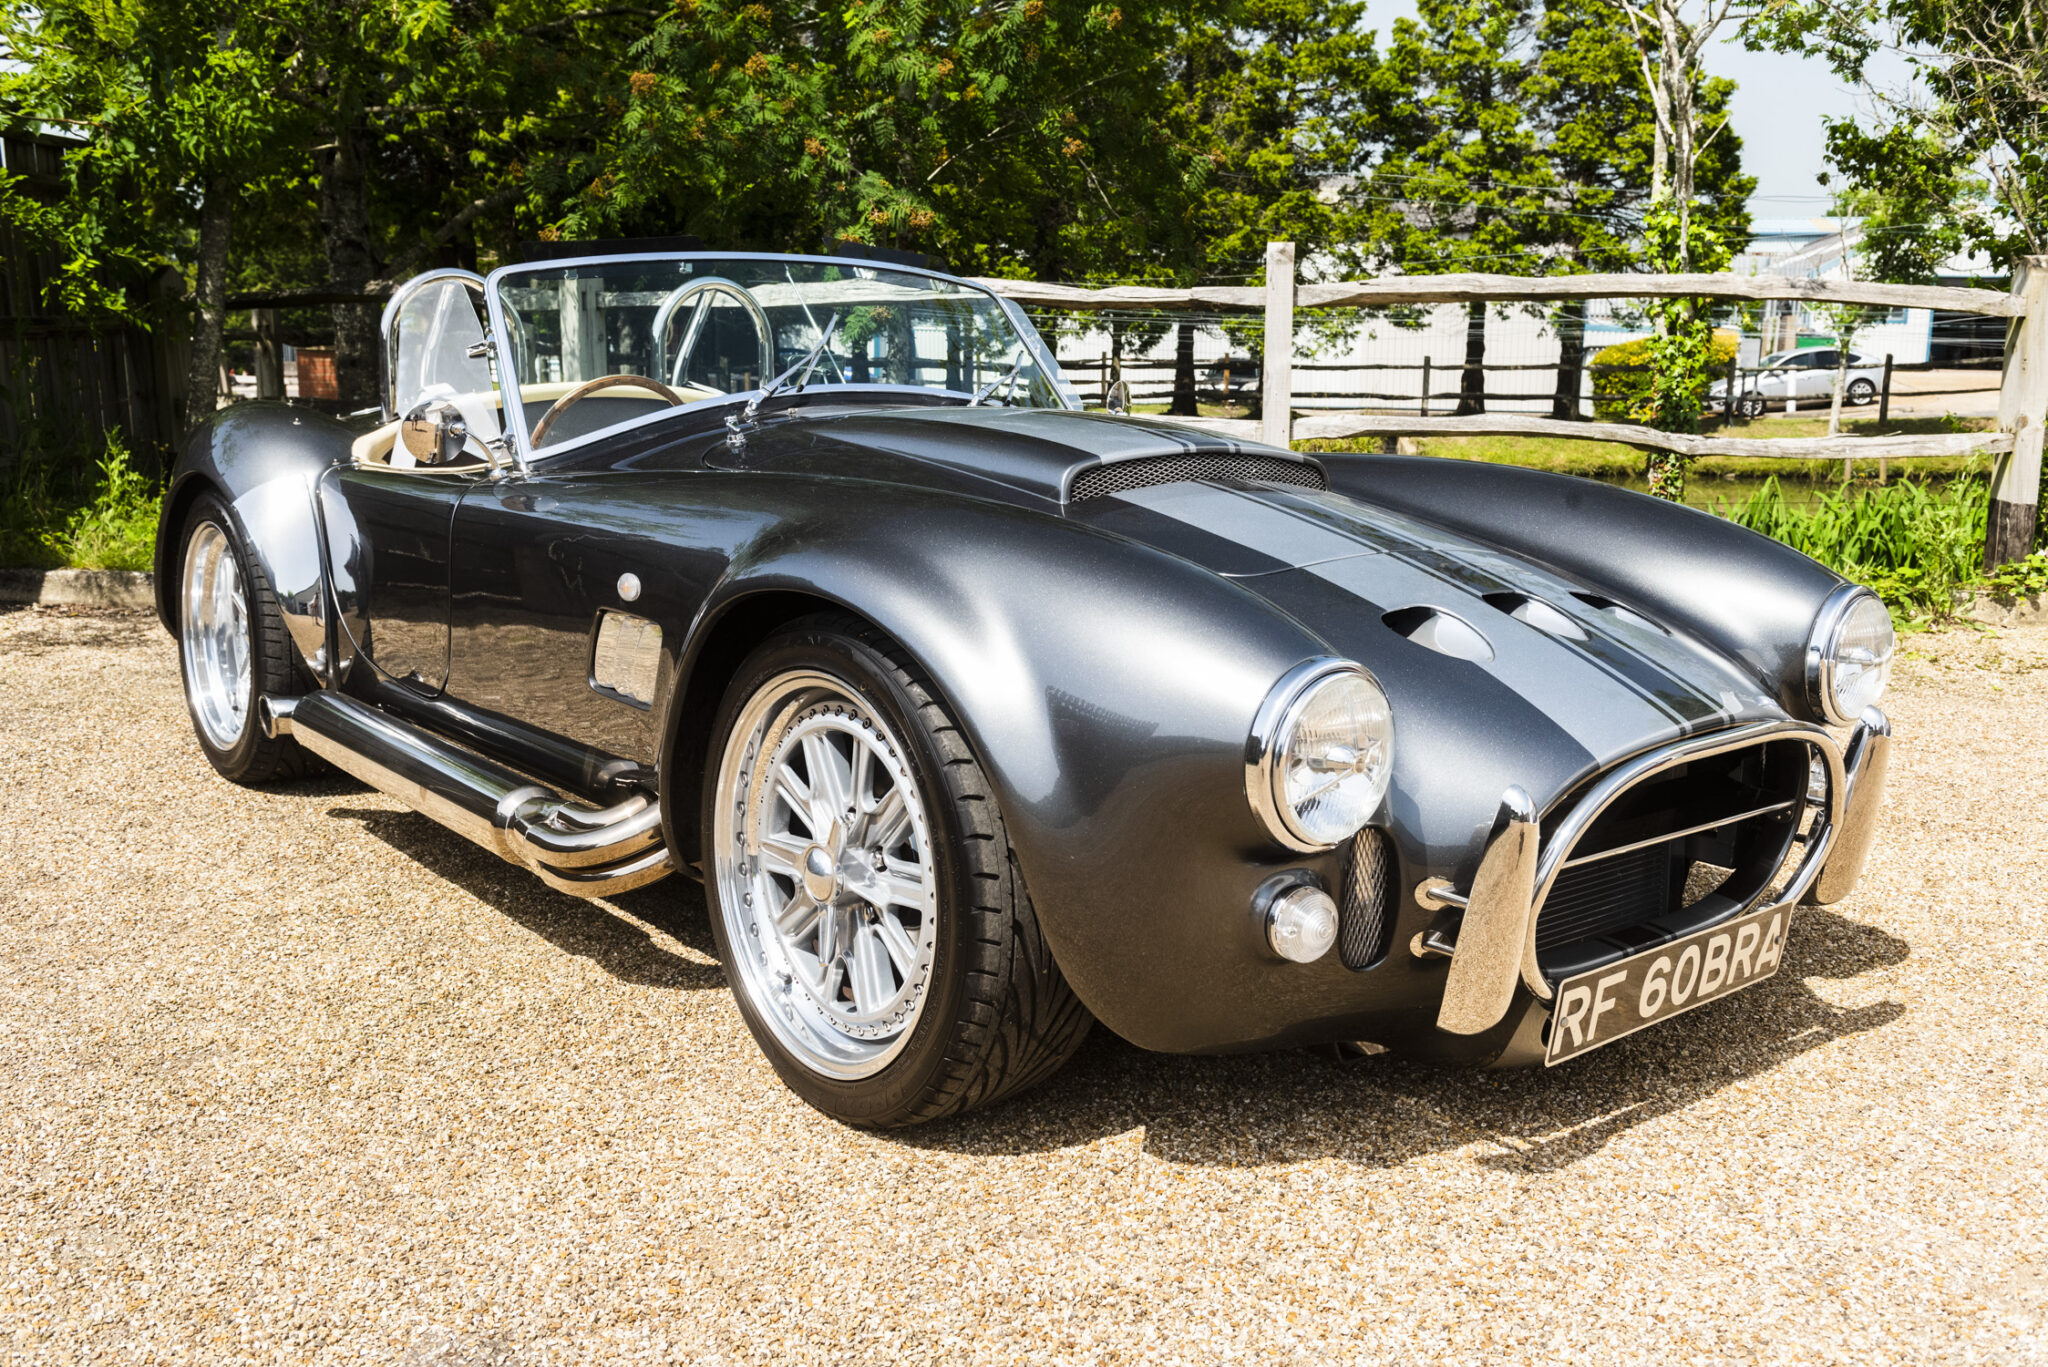 Dax Cobra Chevrolet 383 Specification and an outstanding quality build. - Muscle Car